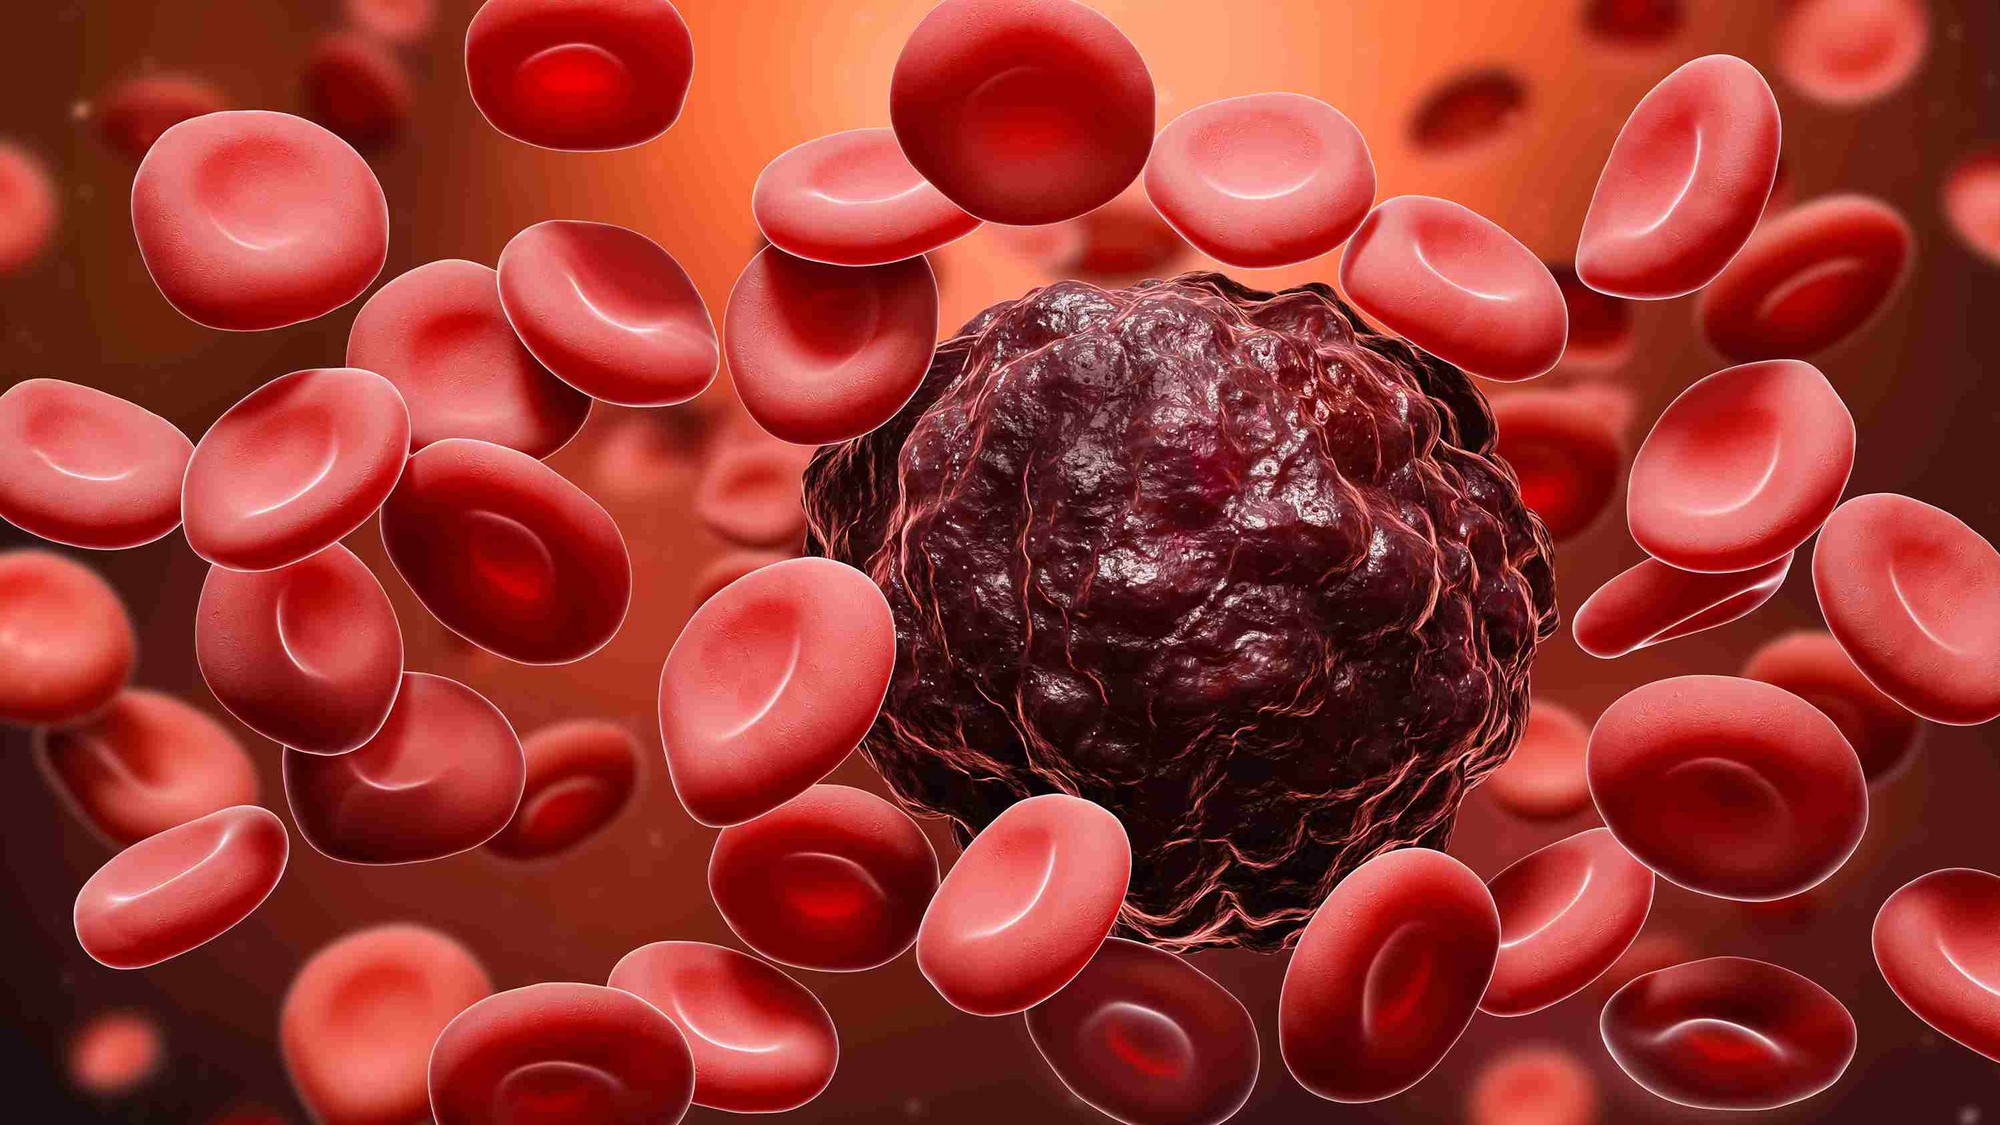 types-of-blood-cancer11zon-1686304687743-16863046878441225463281-1686313509507-16863135096222041706082.jpg